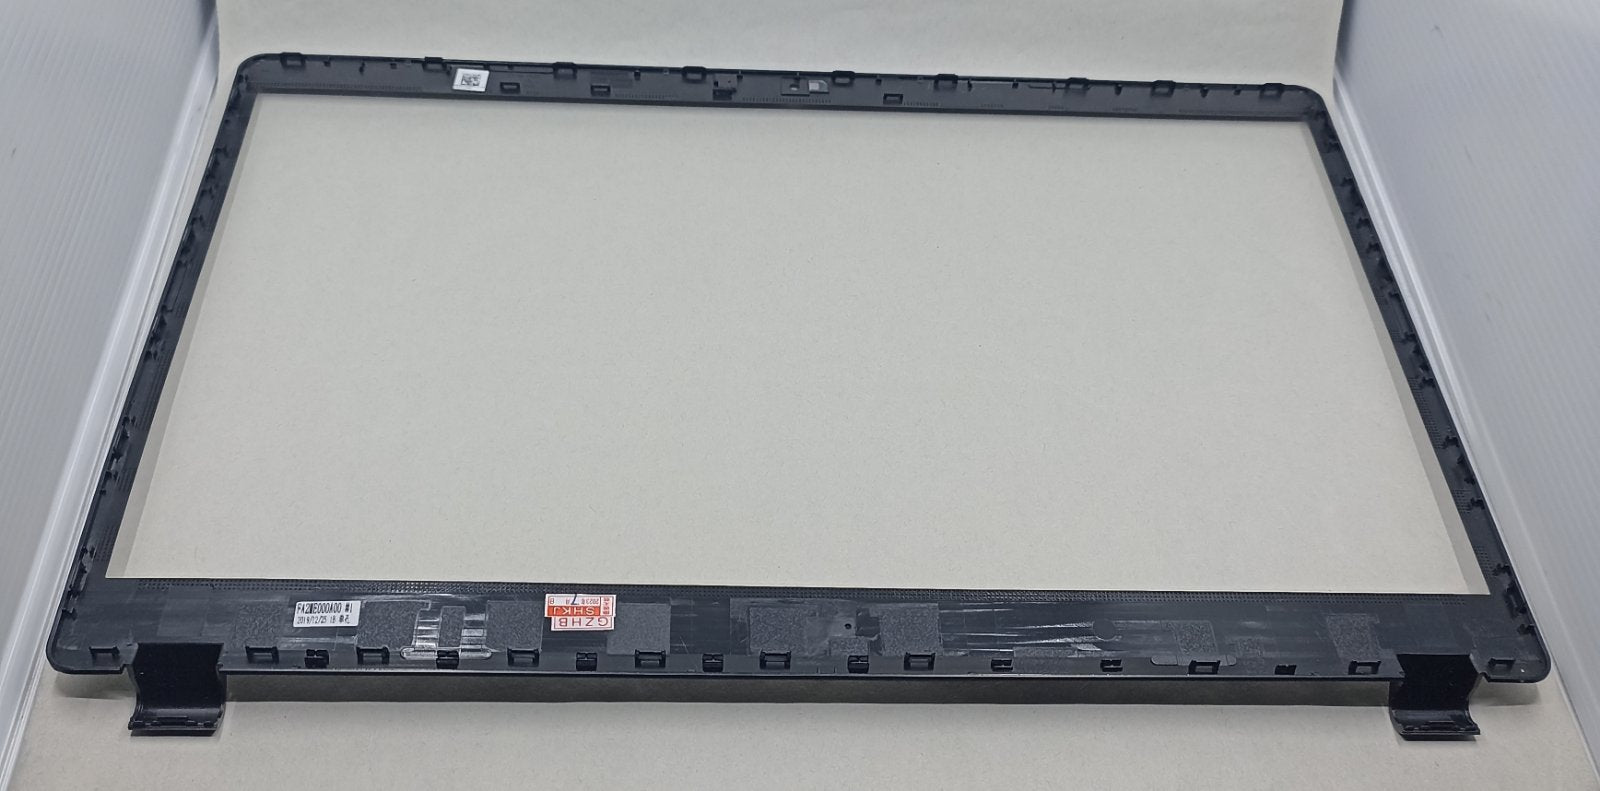 Replacement LCD Bezel For Acer A315-54K WL